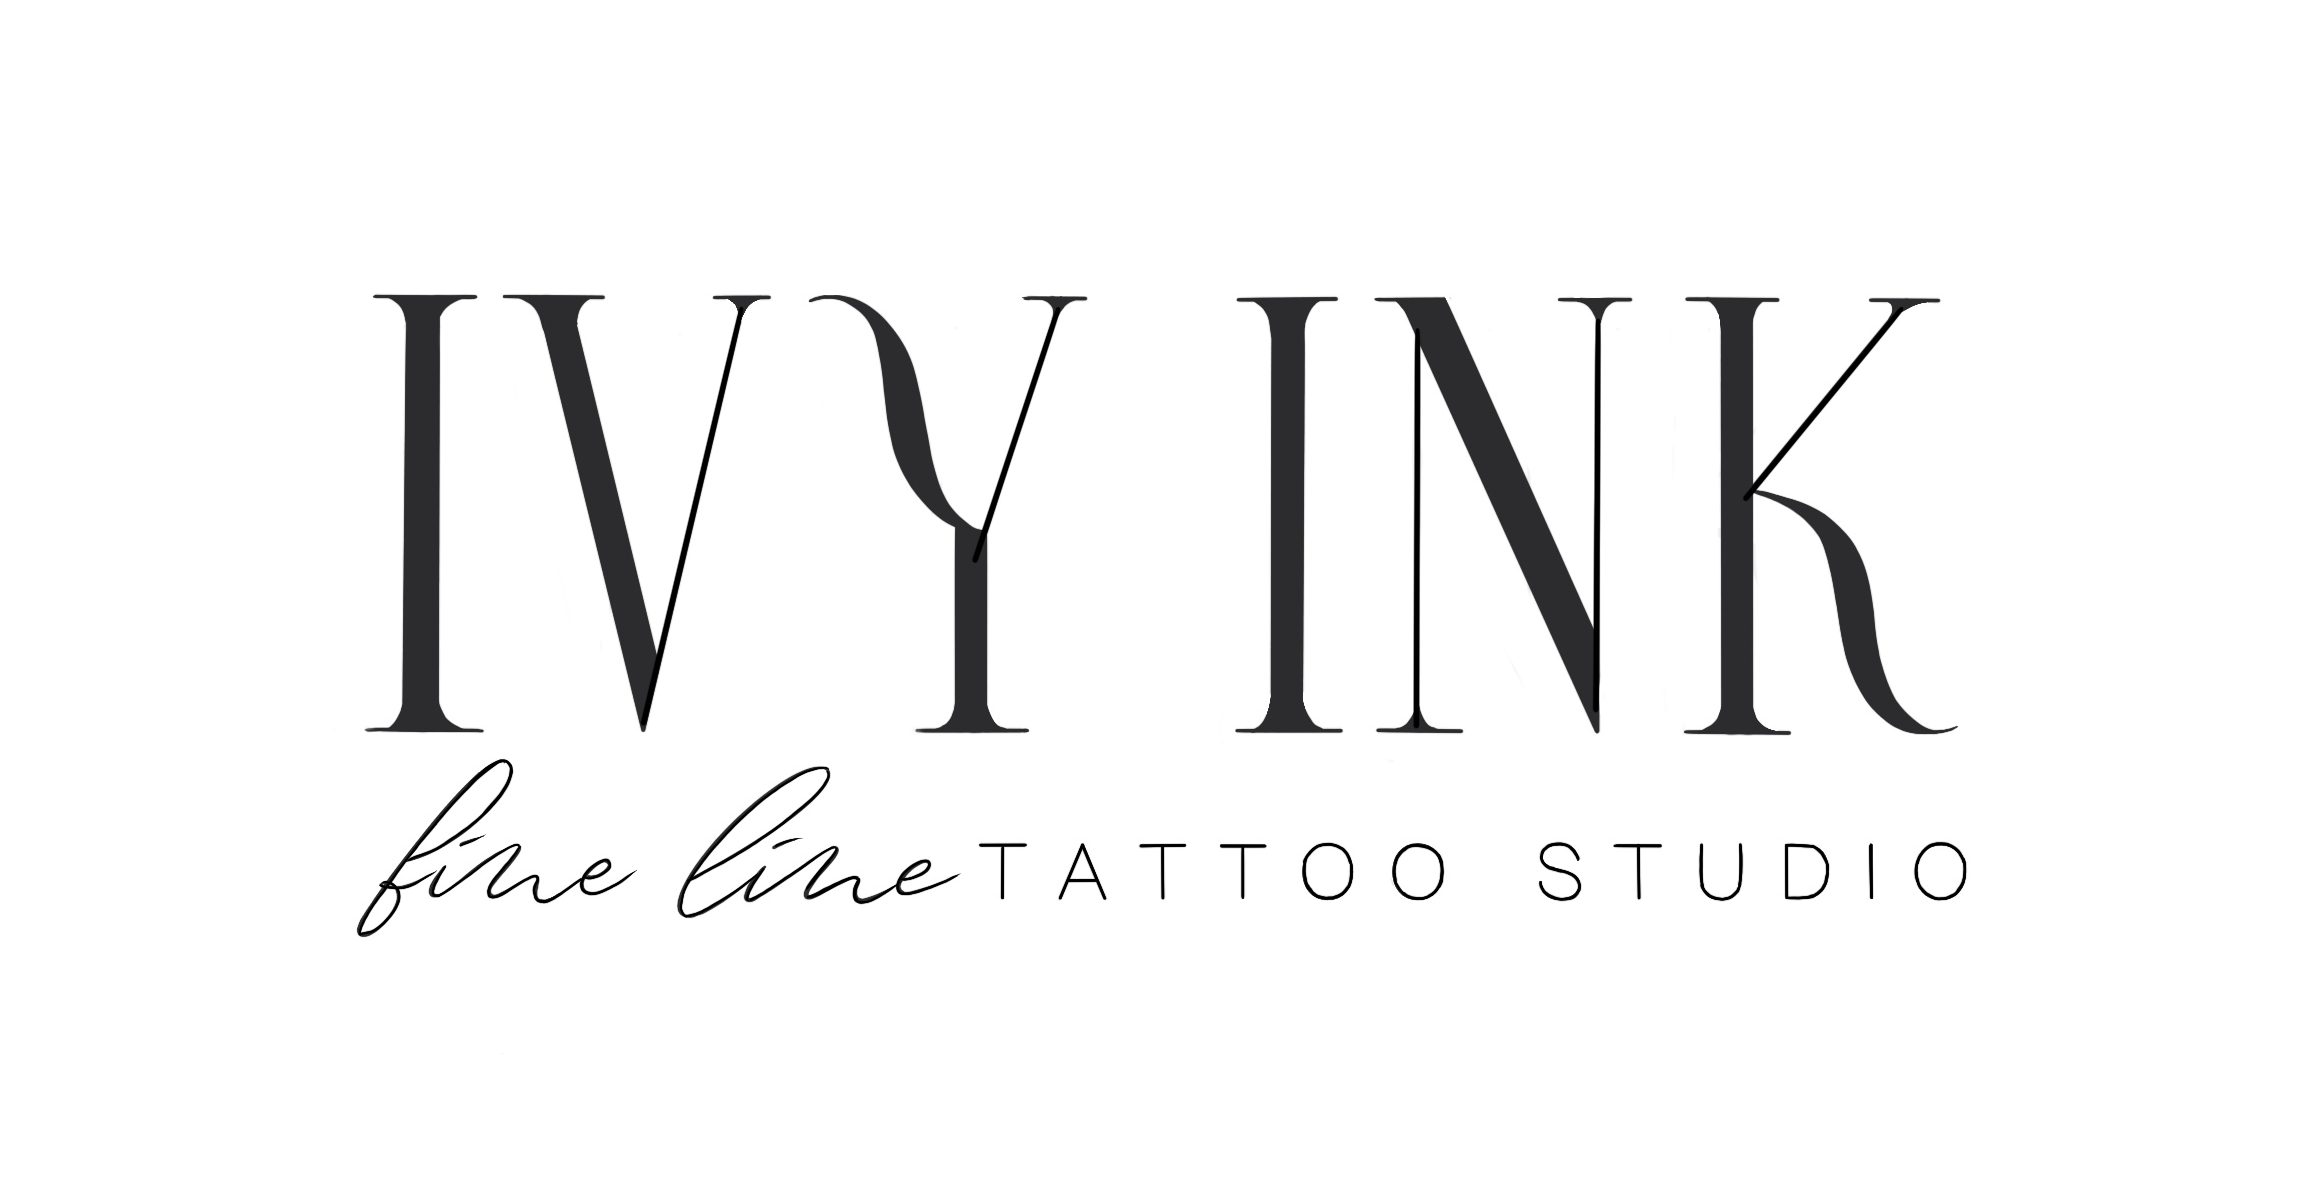 Details more than 58 ink and ivy tattoo  ineteachers